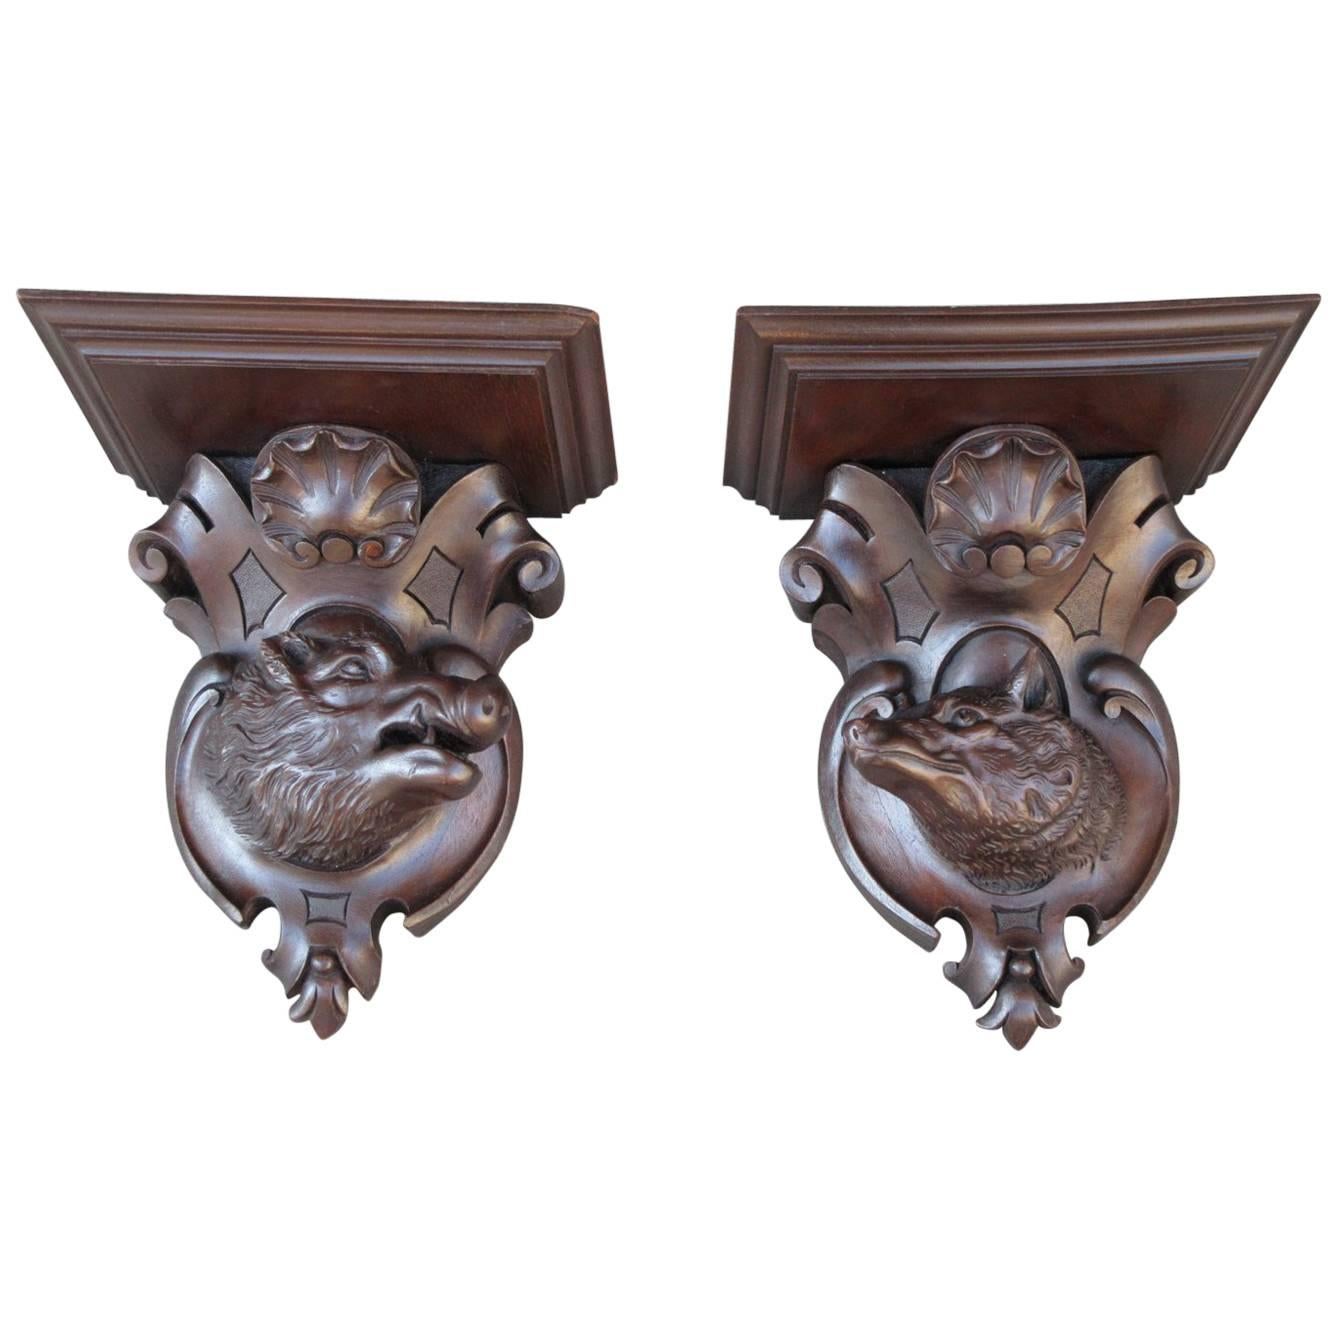 Pair of 19th Century German Black Forest Carved Walnut Wall Brackets